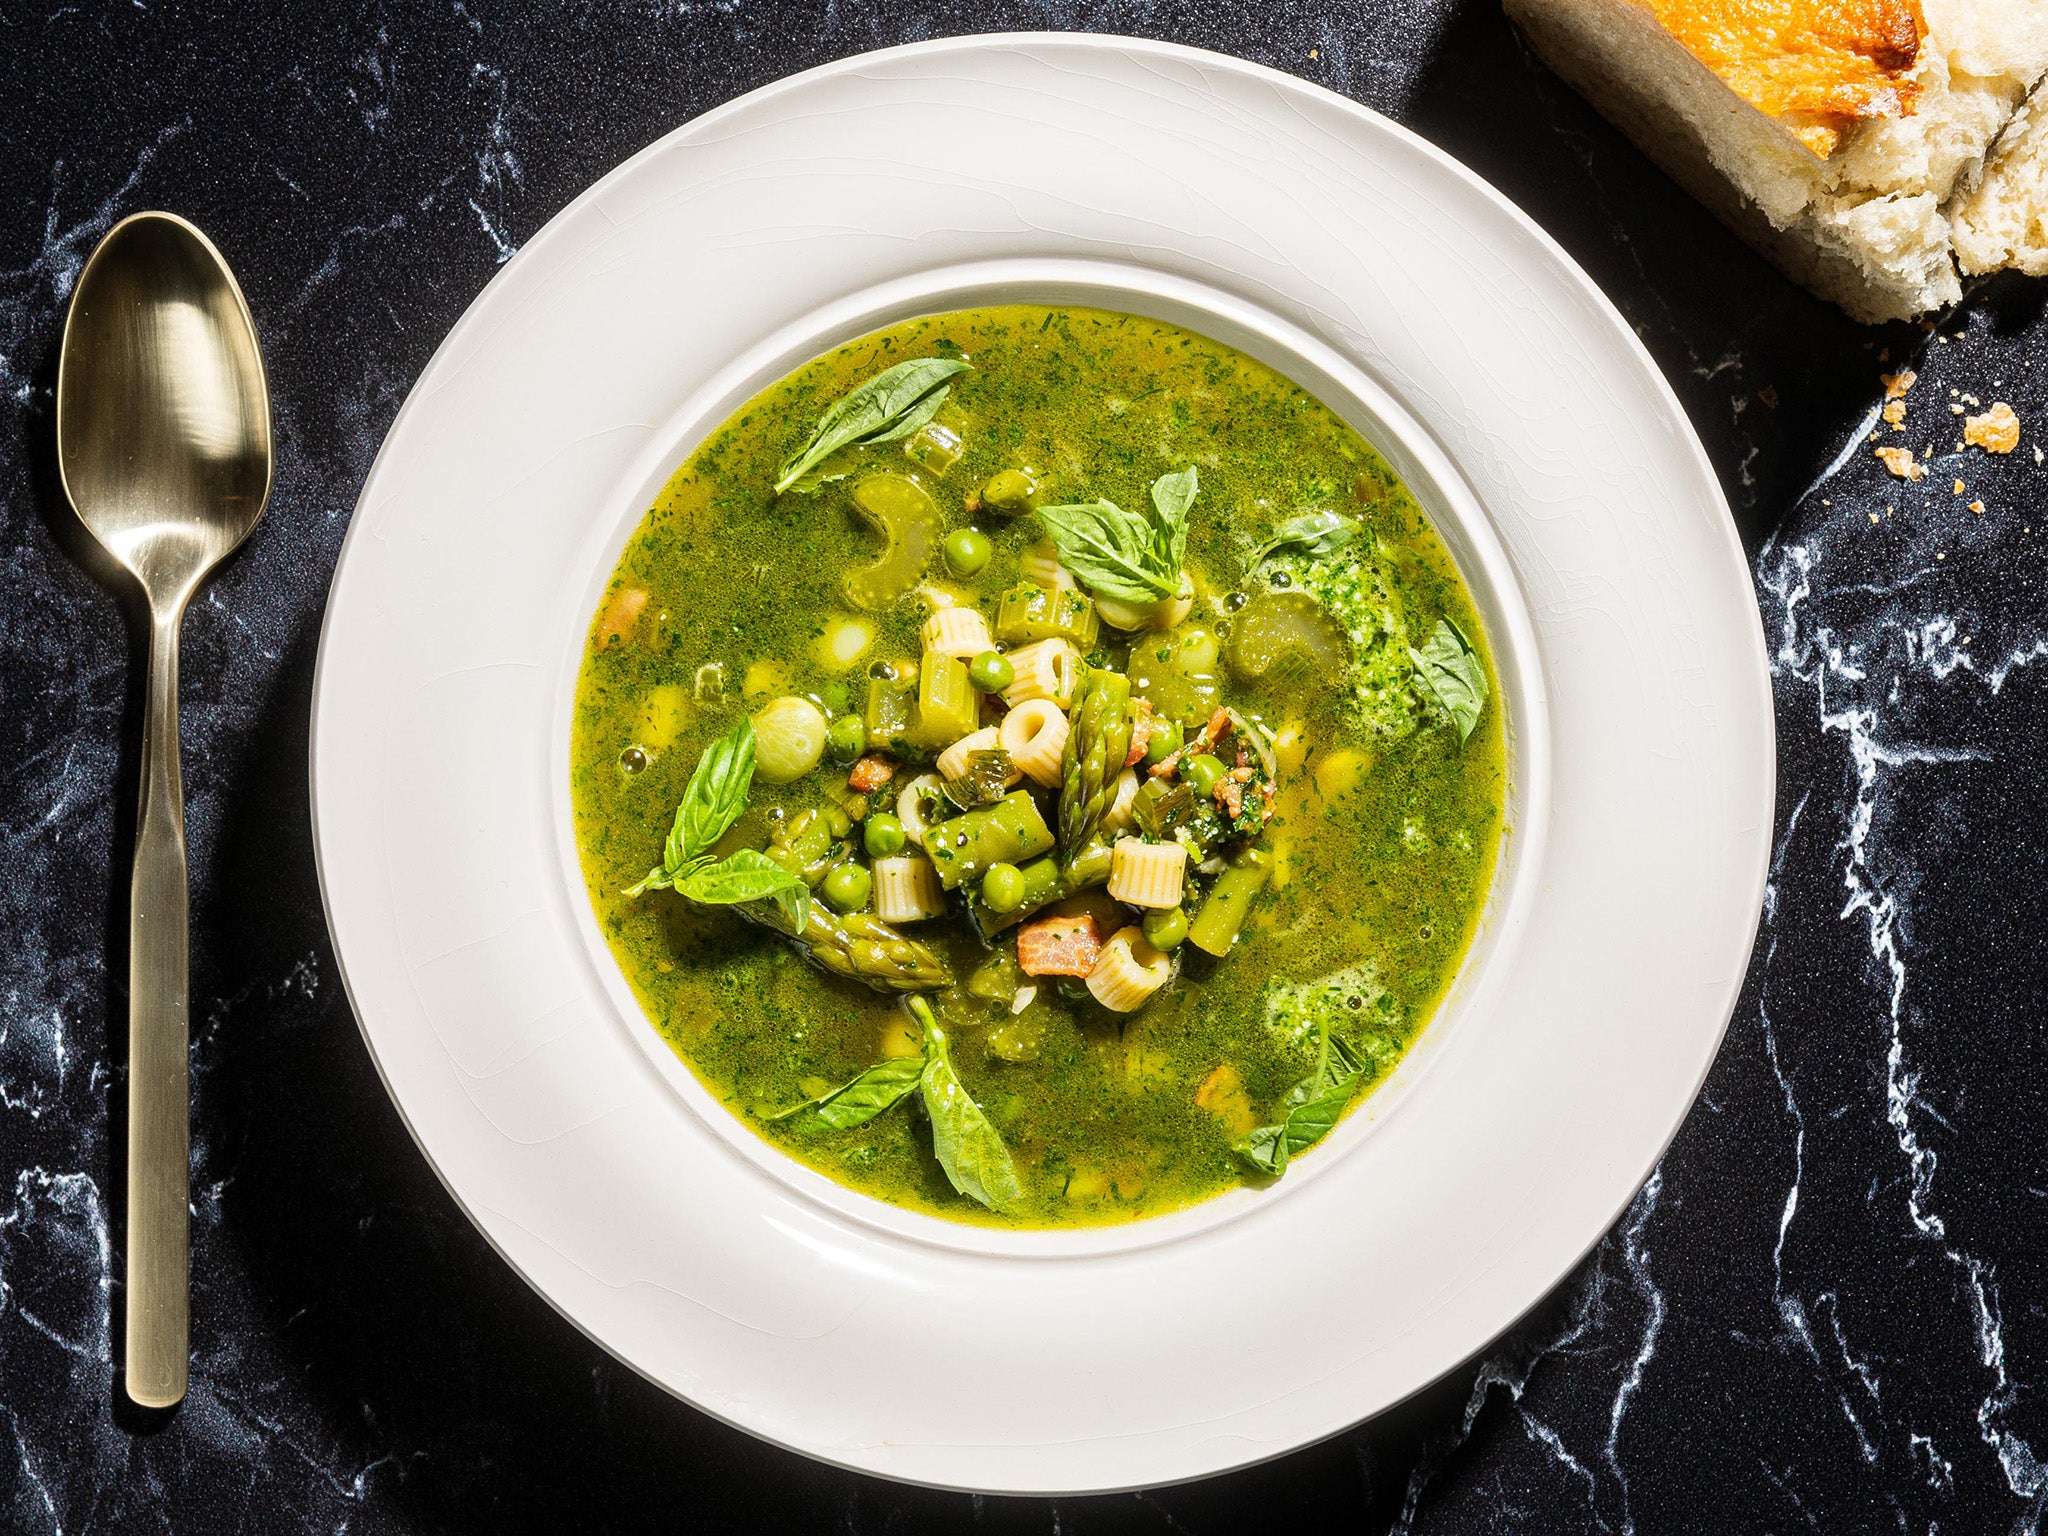 This minestrone, thick with spring vegetables, is tinted green with an herb pesto swirled into each bowl before serving